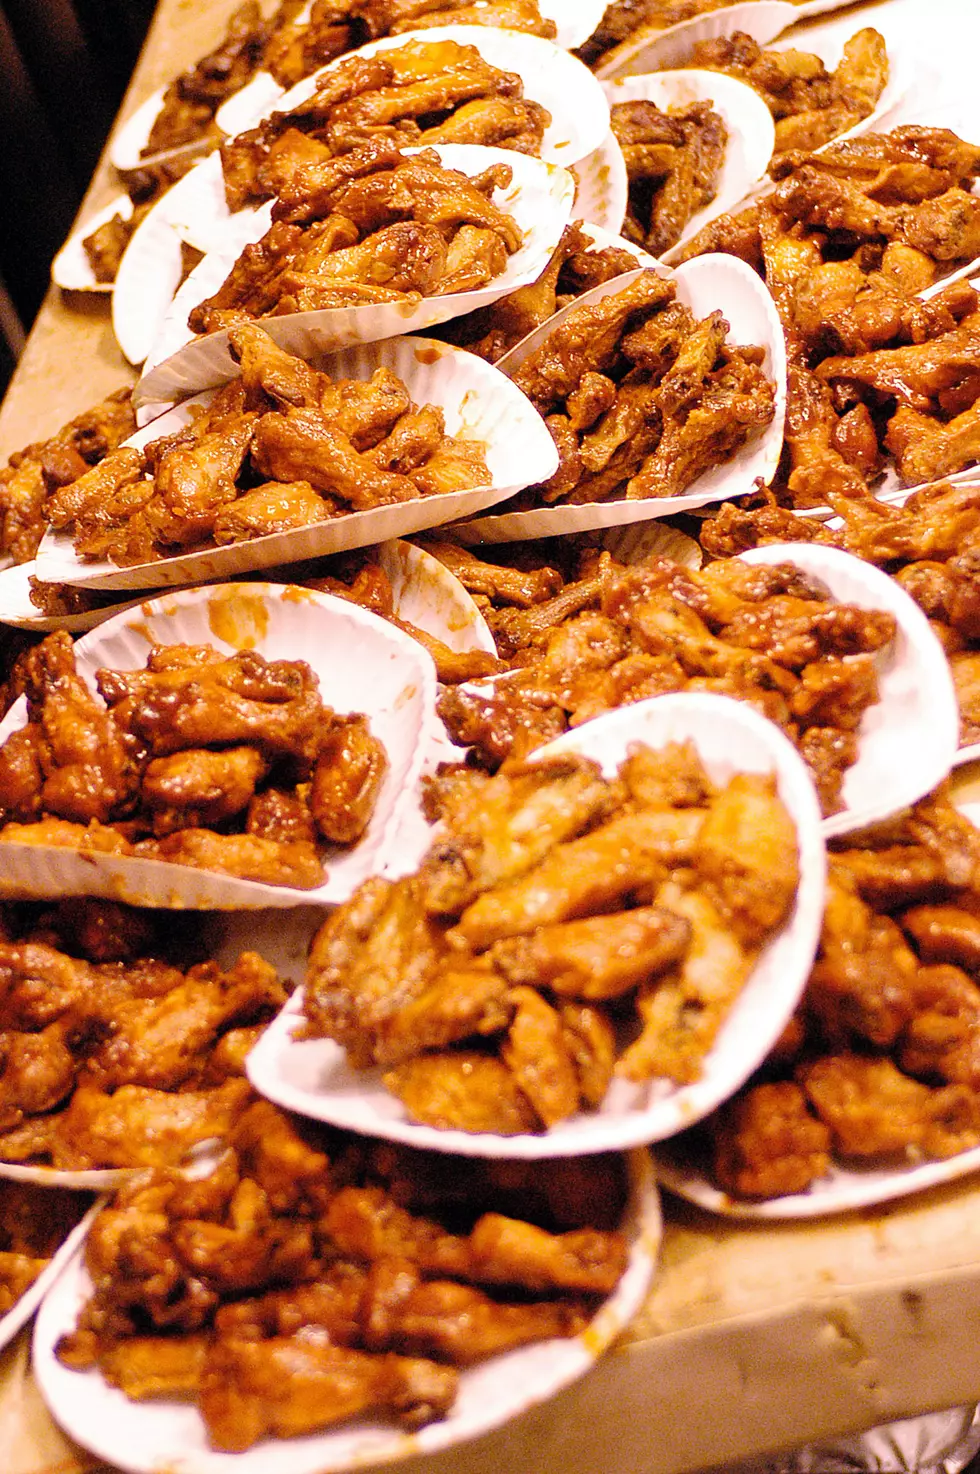 7th Annual Cascade Wing and Brew Fest Saturday